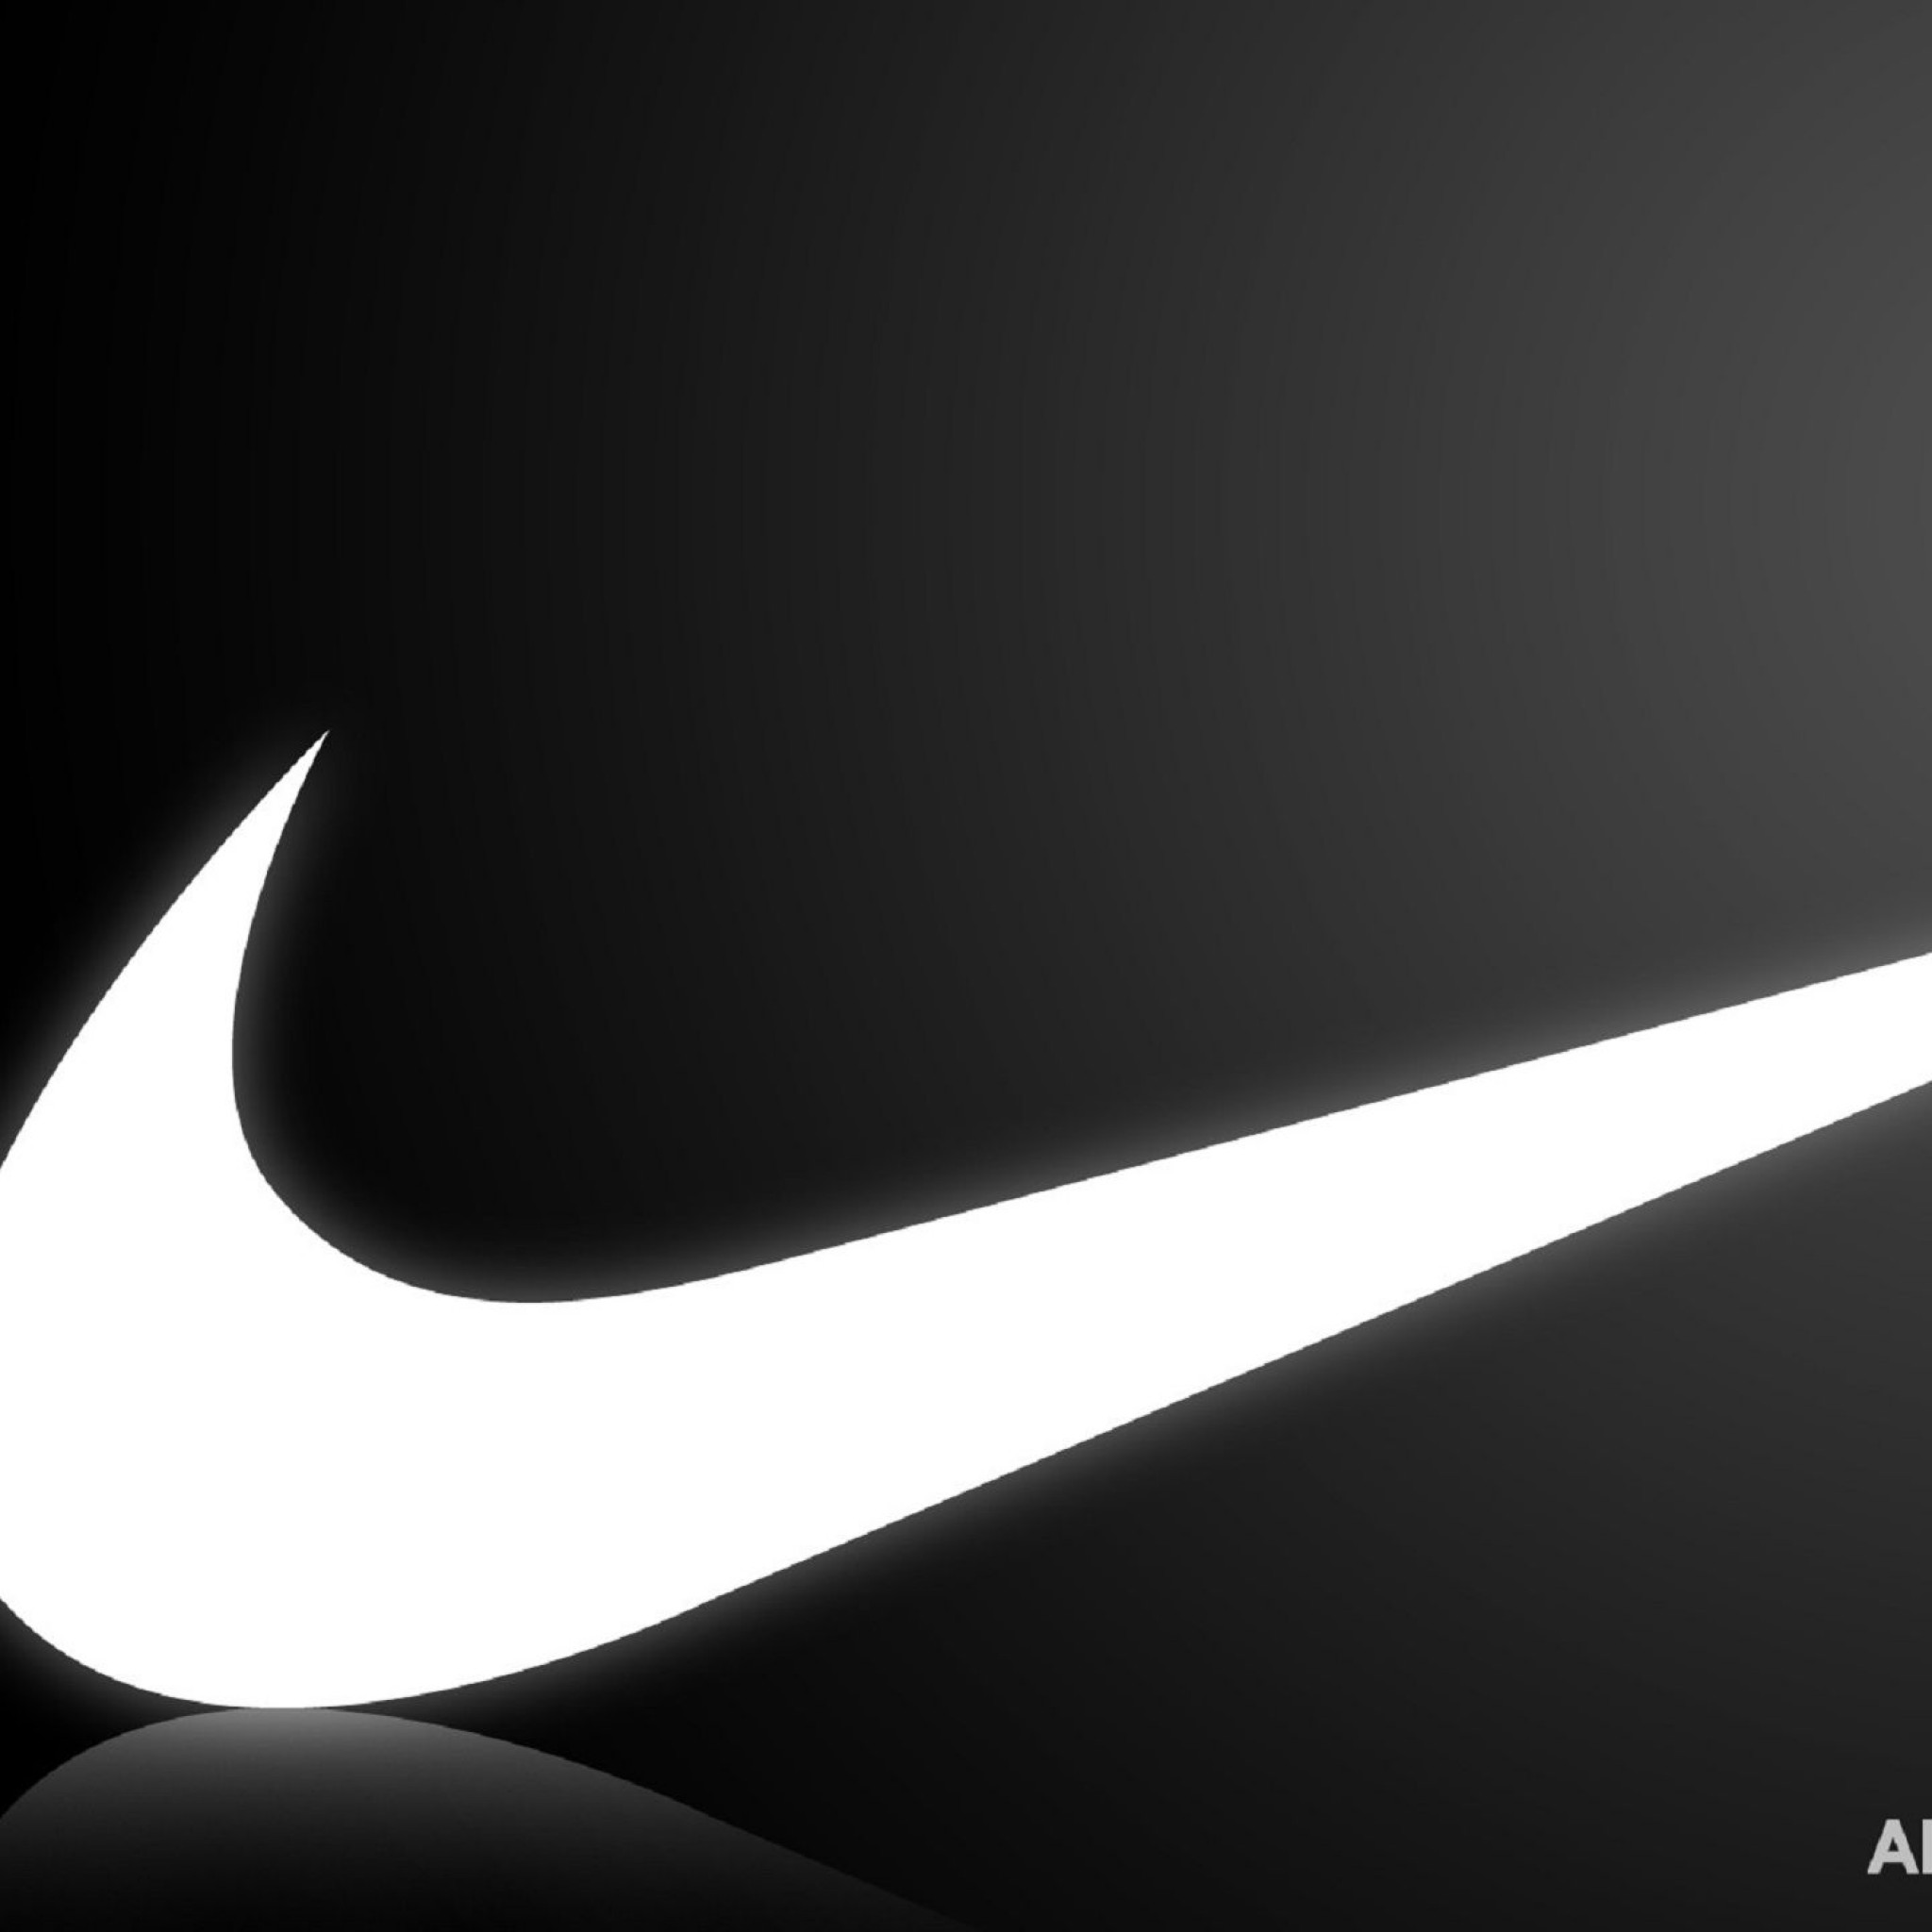 Free Download Popular New For Iphone5 For Ios7 For Iphone4 For Android 48x48 For Your Desktop Mobile Tablet Explore 50 Nike Wallpaper Hd For Iphone Wallpaper Of Nike Hd